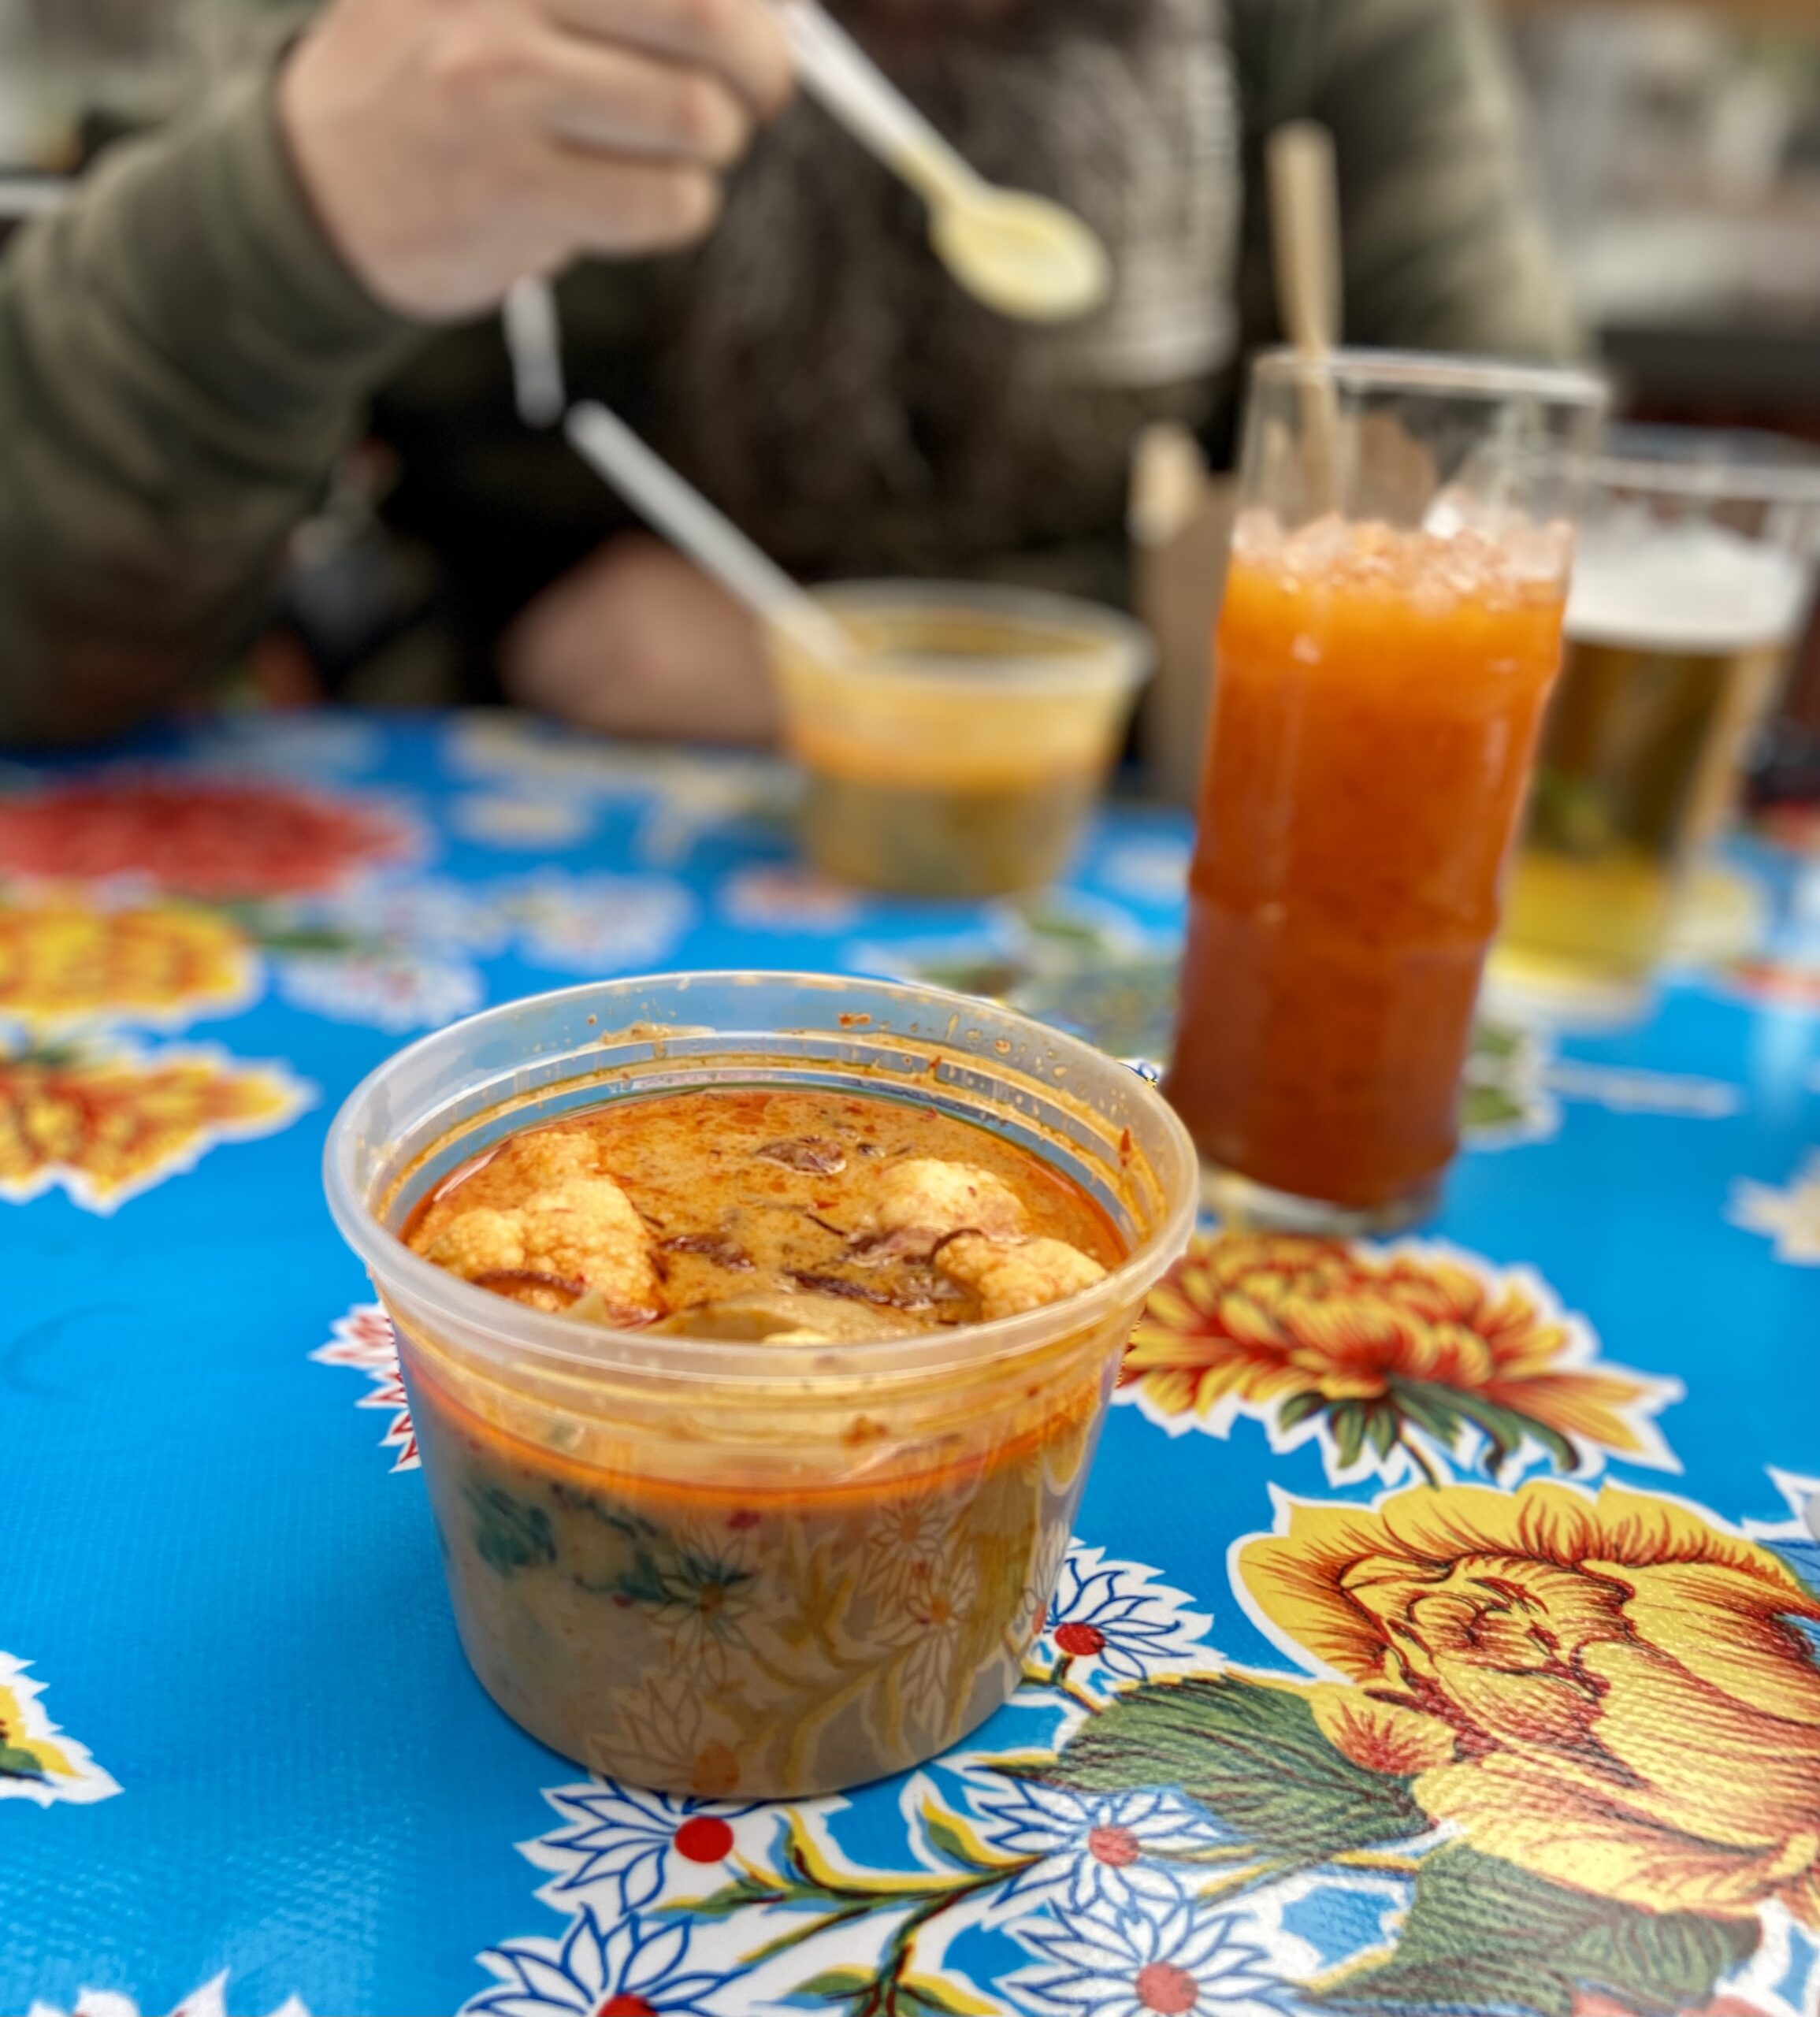 on a brilliant blue tablecloth decorates with yellow, red and blue flowers sits a plastic container of amber-colored curry, cauliflower and oyster mushroom pieces visible in the broth. behind the curry is a tall glass with an orange-amber colored beverage, behind that a pale amber beer and another darker curry container. a person with a camo sweatshirt is eating the curry